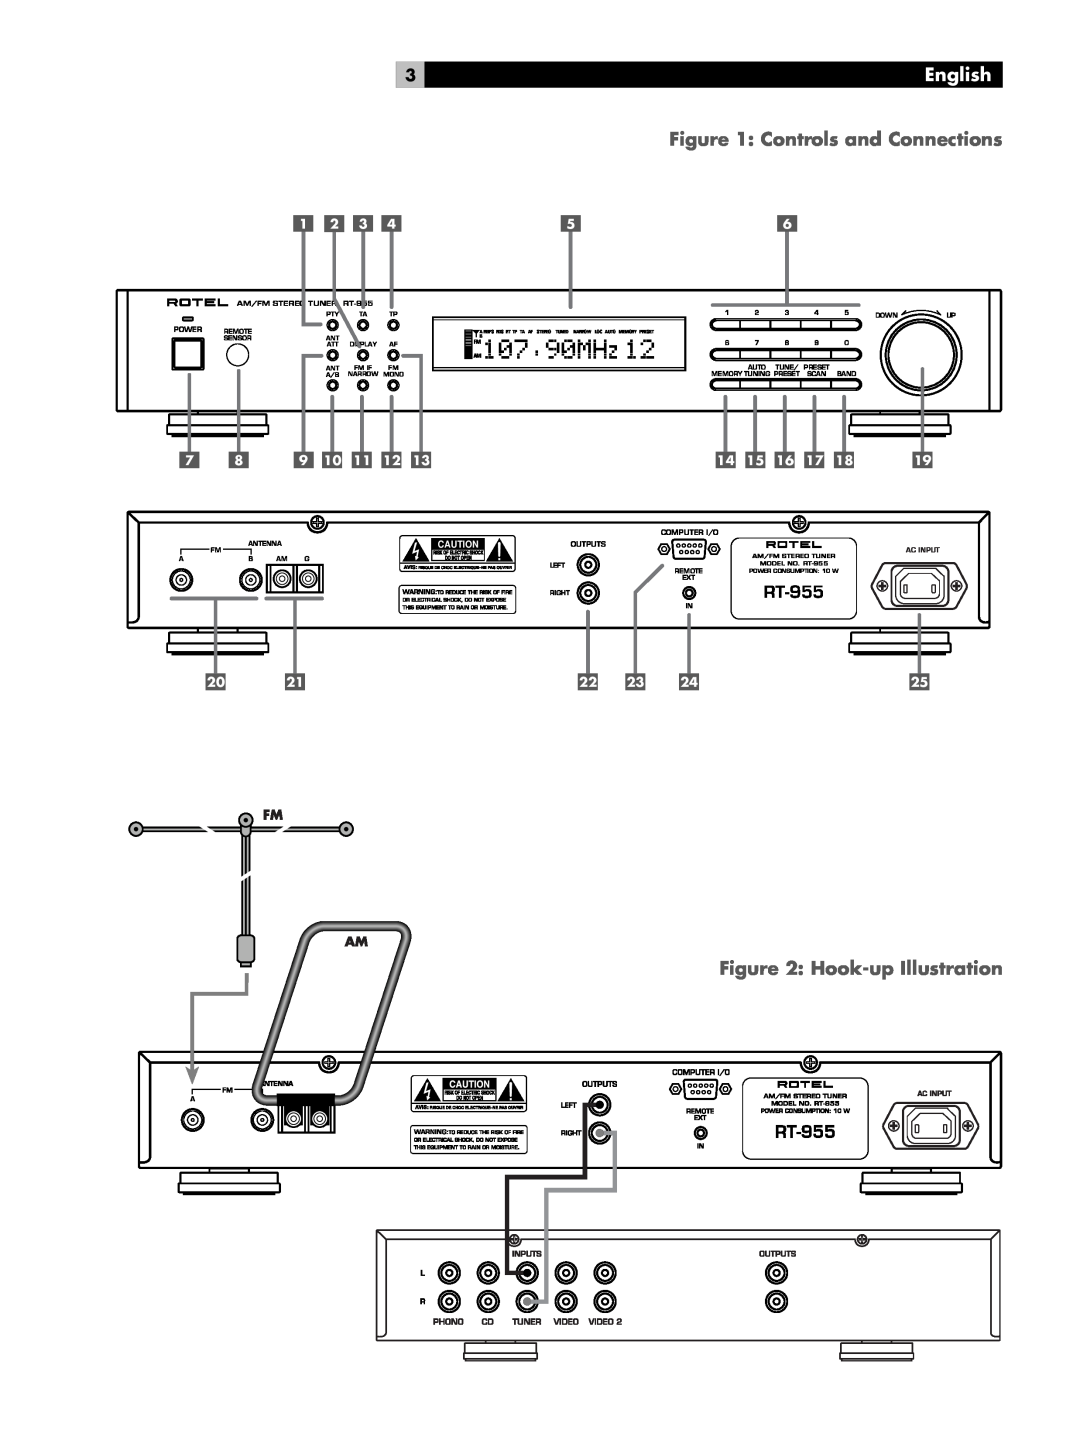 Rotel RT-955 owner manual English, Controls and Connections, Hook-upIllustration 